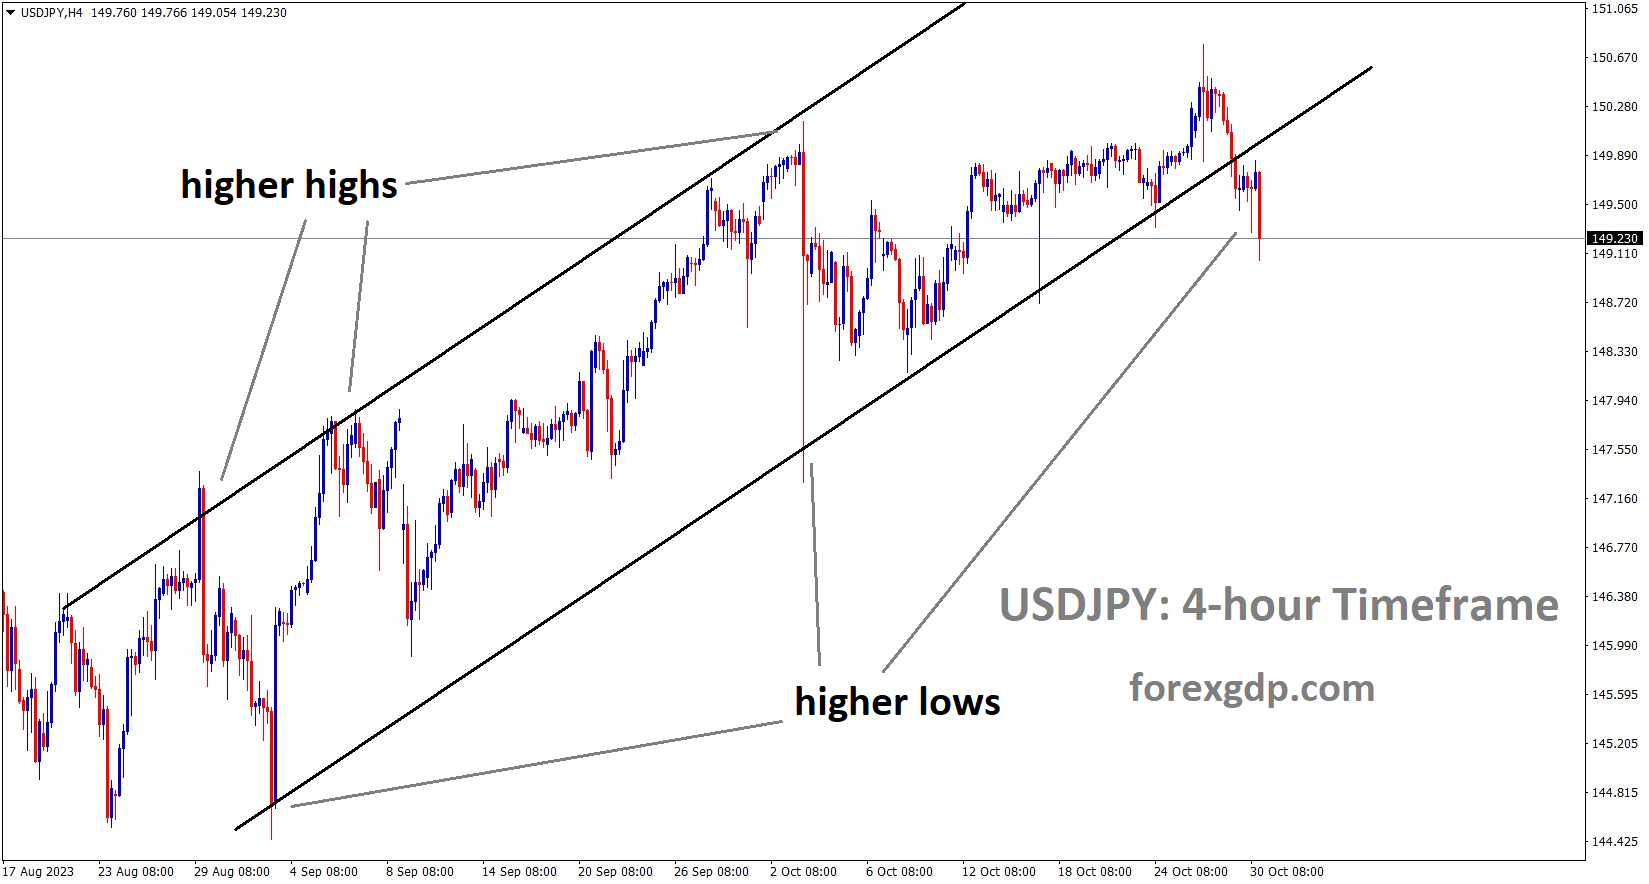 USDJPY is moving in an Ascending channel and the market has reached the higher low area of the channel